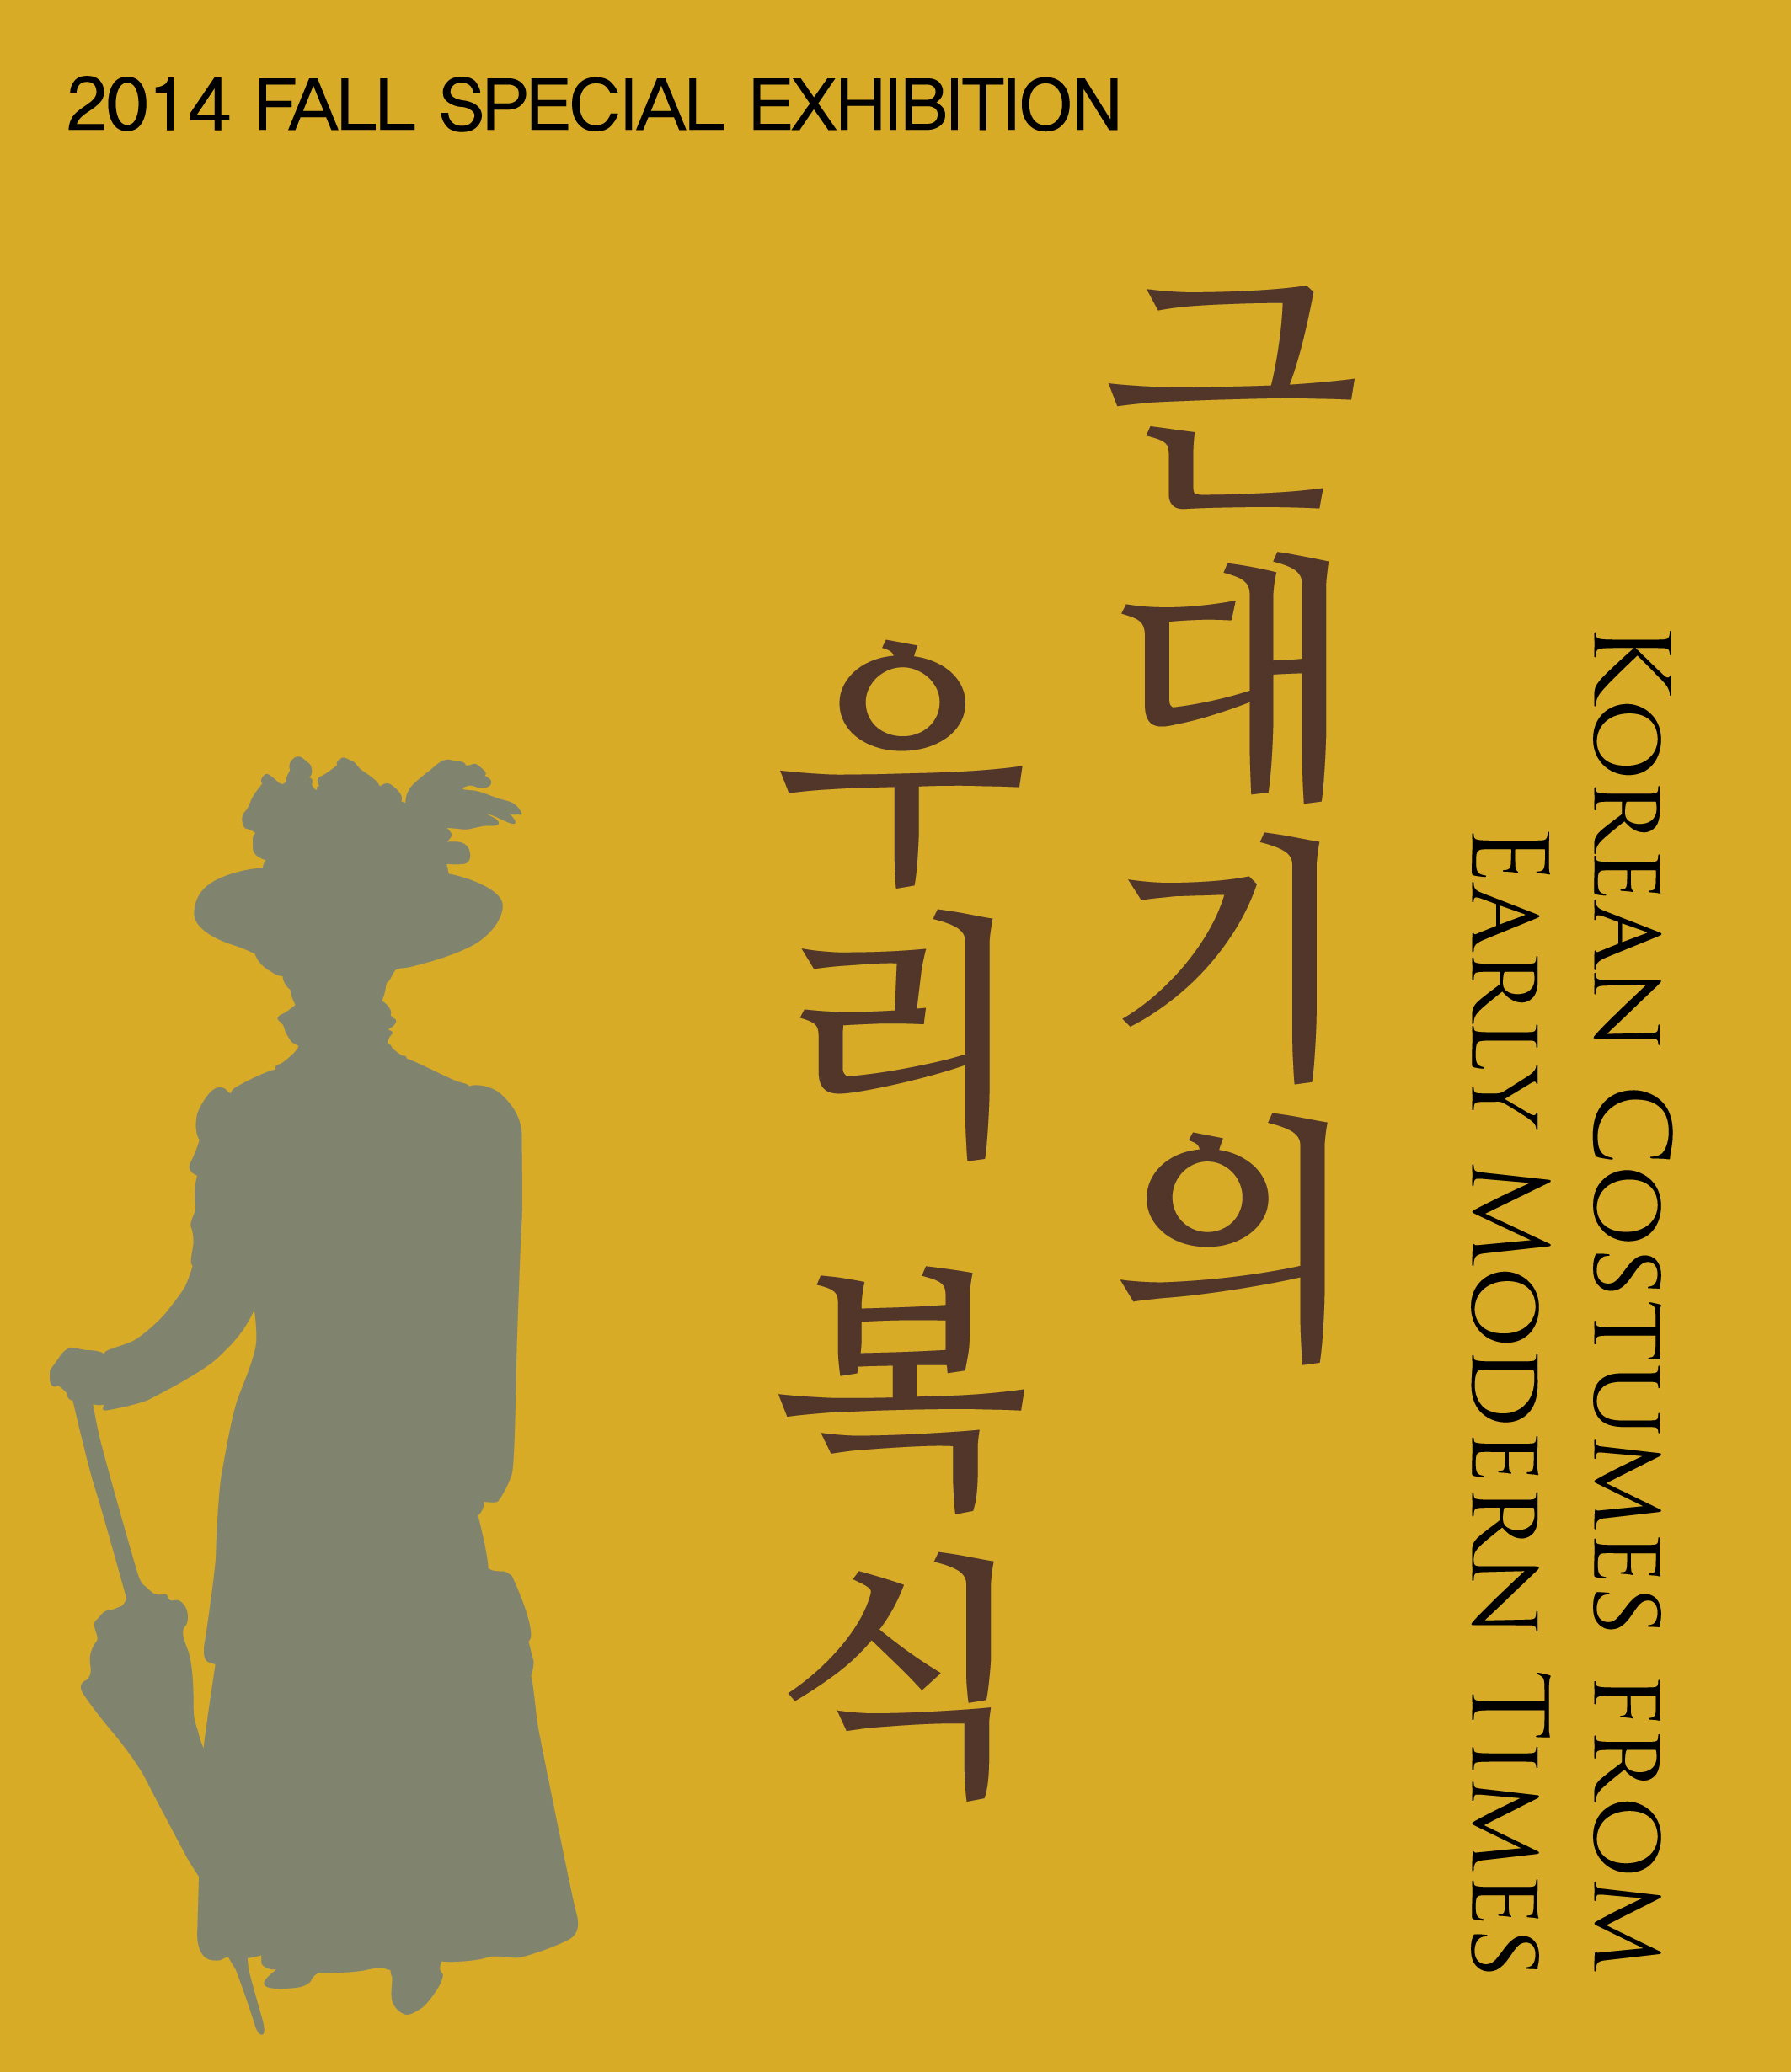 KOREAN COSTUMES FROM EARLY MODERN TIMES